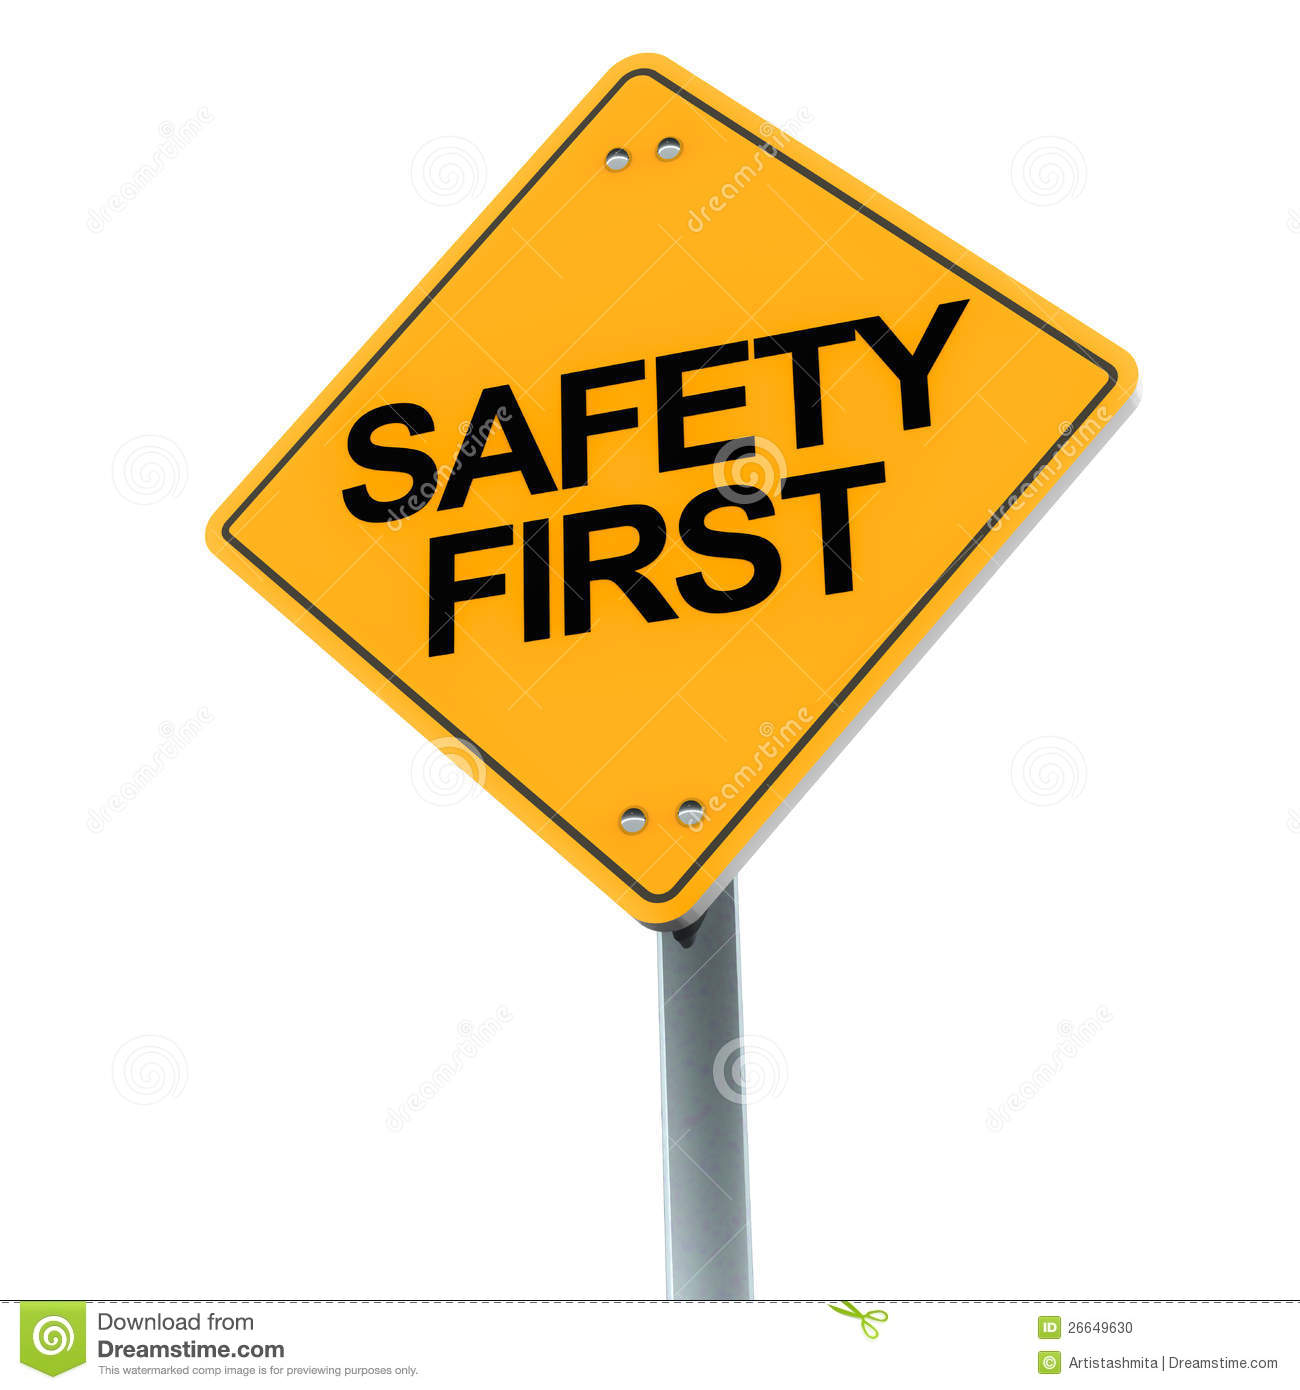 Safety First Clipart Safety F